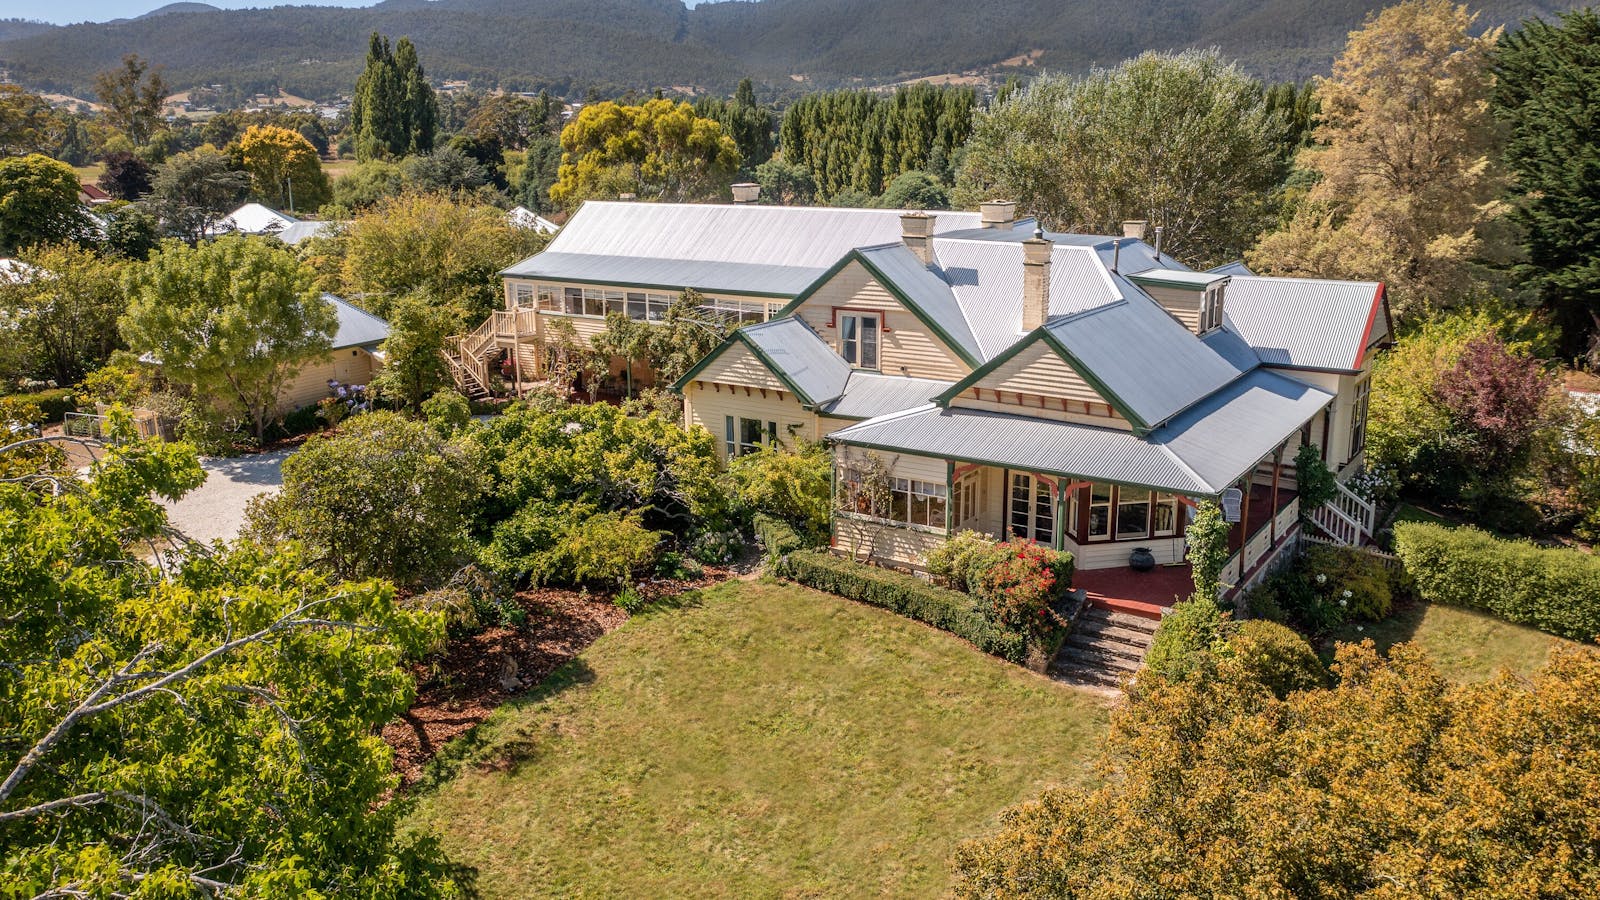 Clifton Homestead, set on five acres and nestled in the heart of Tasmania's Huon Valley